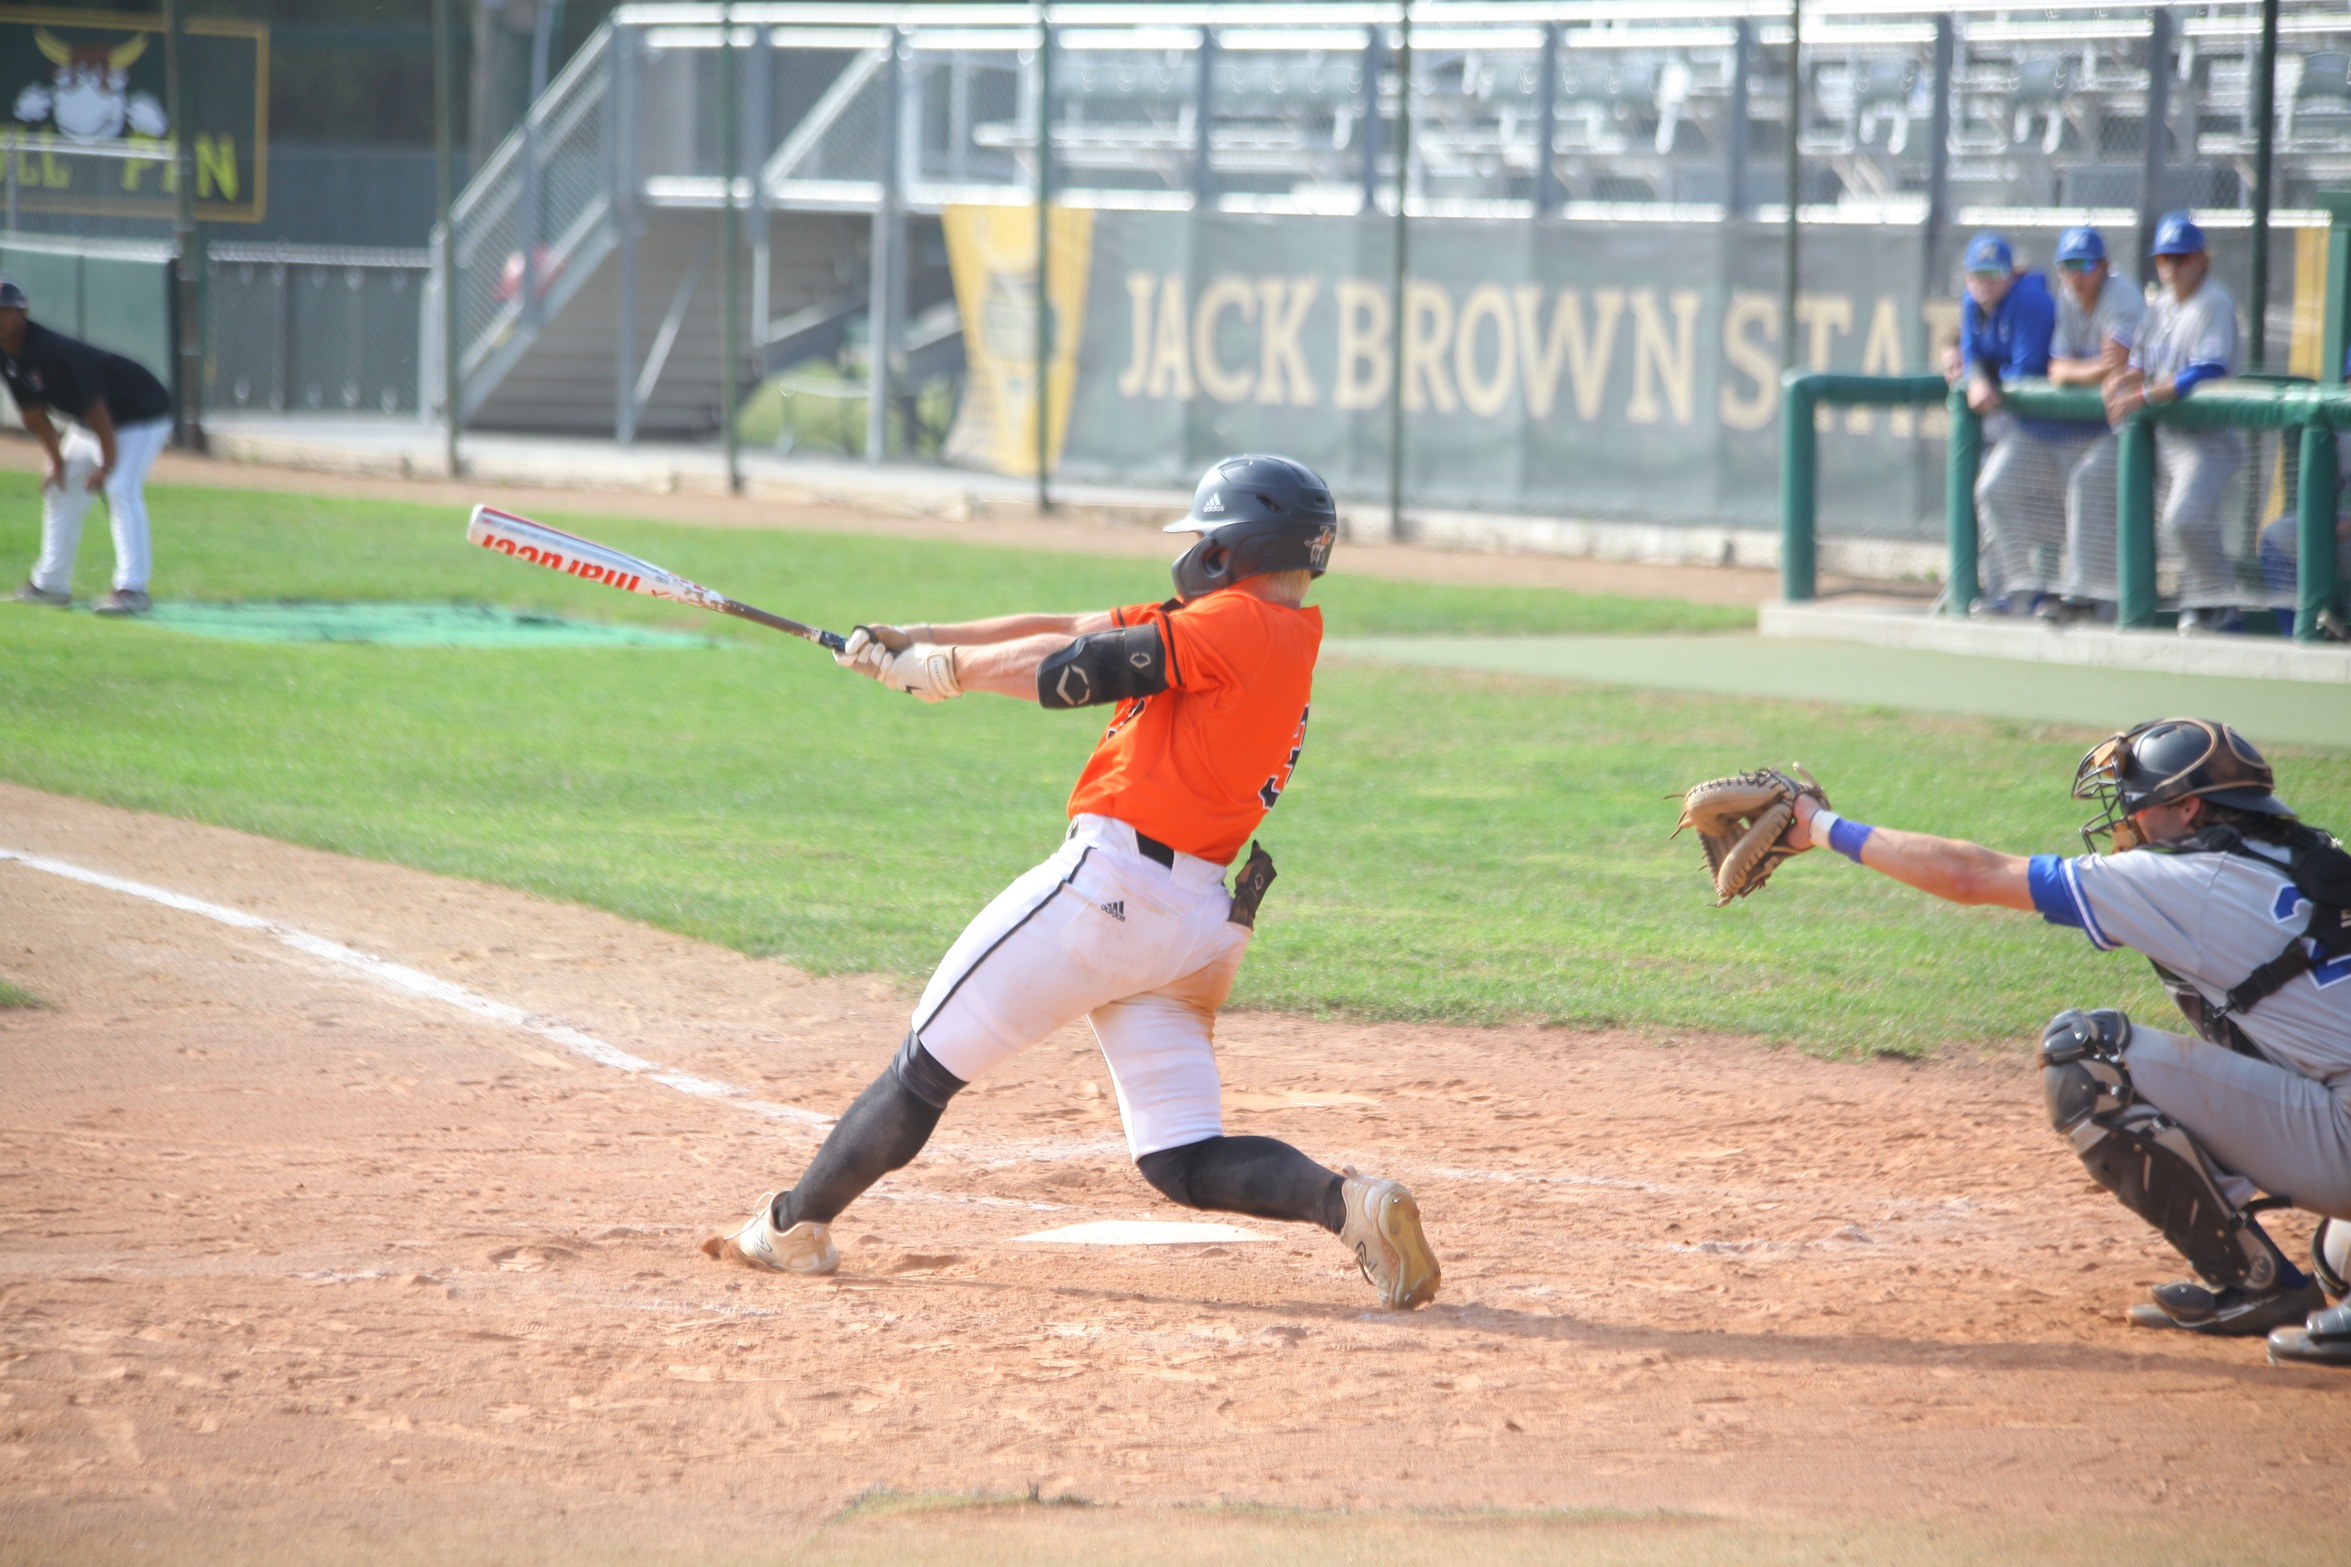 Chase Burke connects for a single in the Jimmies' 15-6 win in game one of Monday's doubleheader / Photo by Molly Dockter, UJ Sports Information